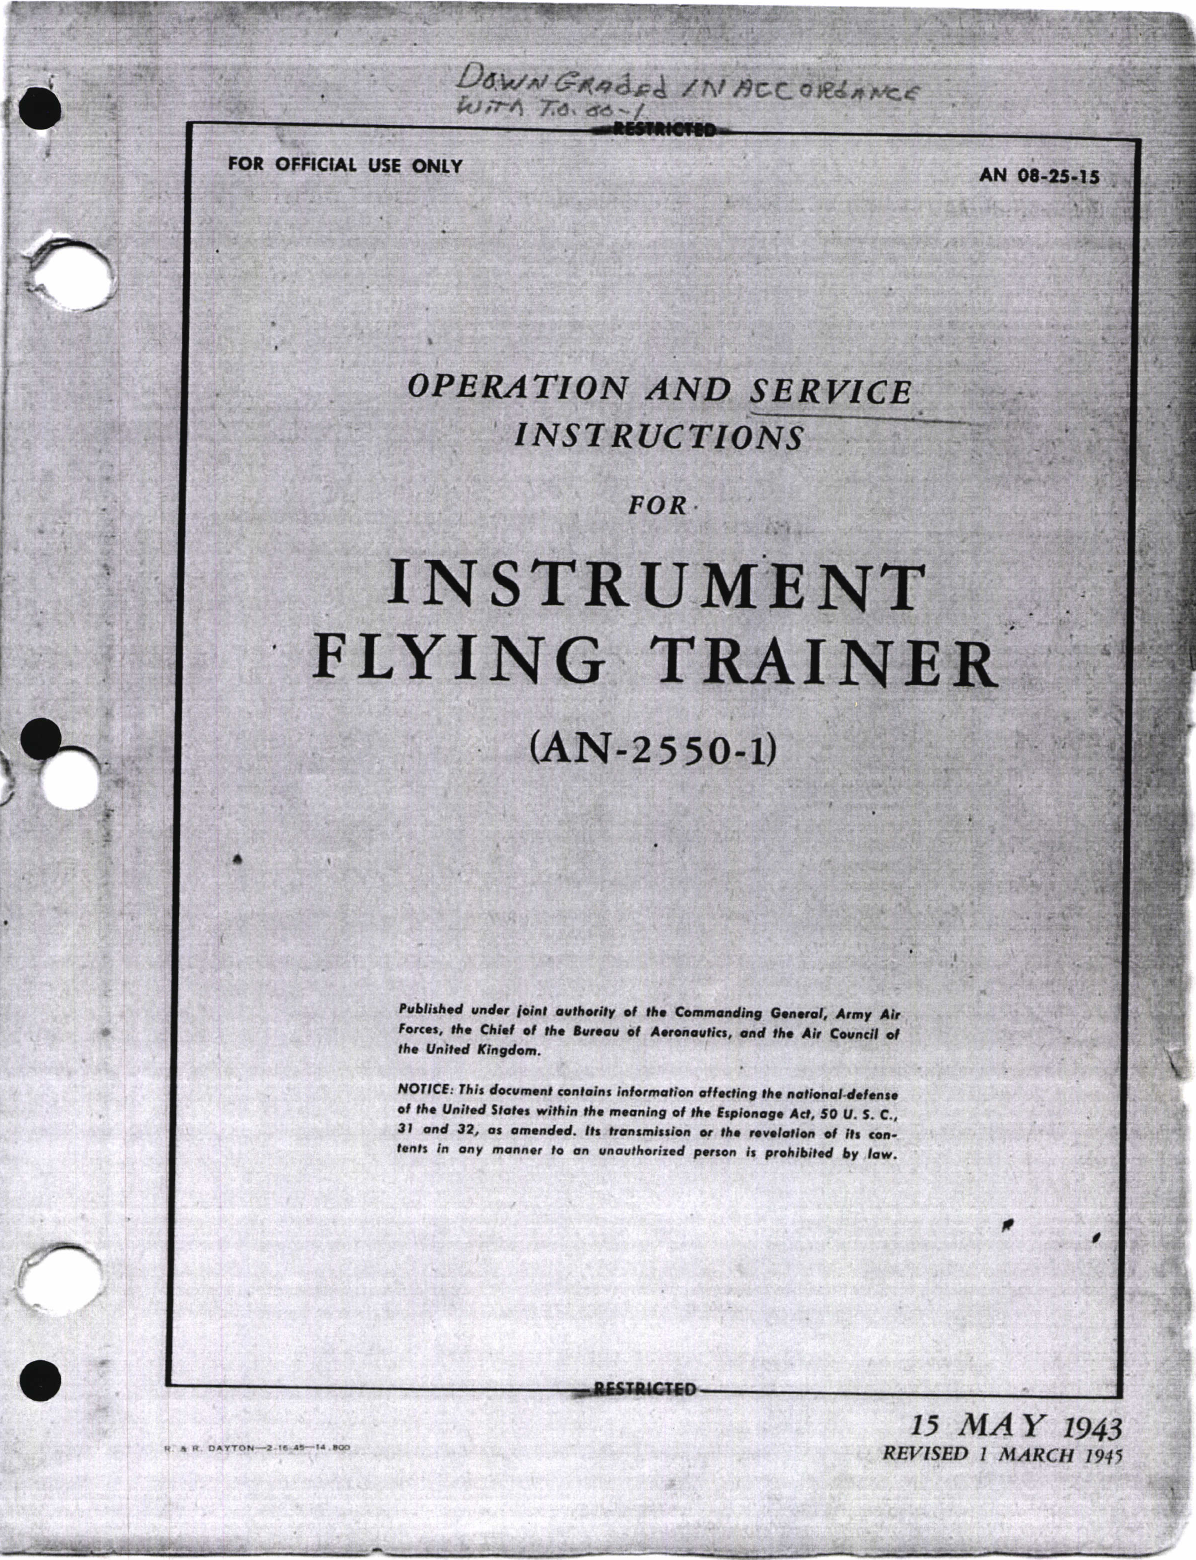 Sample page 1 from AirCorps Library document: Operation and Service Instructions for Instrument Flying Trainer (AN-2550-1)